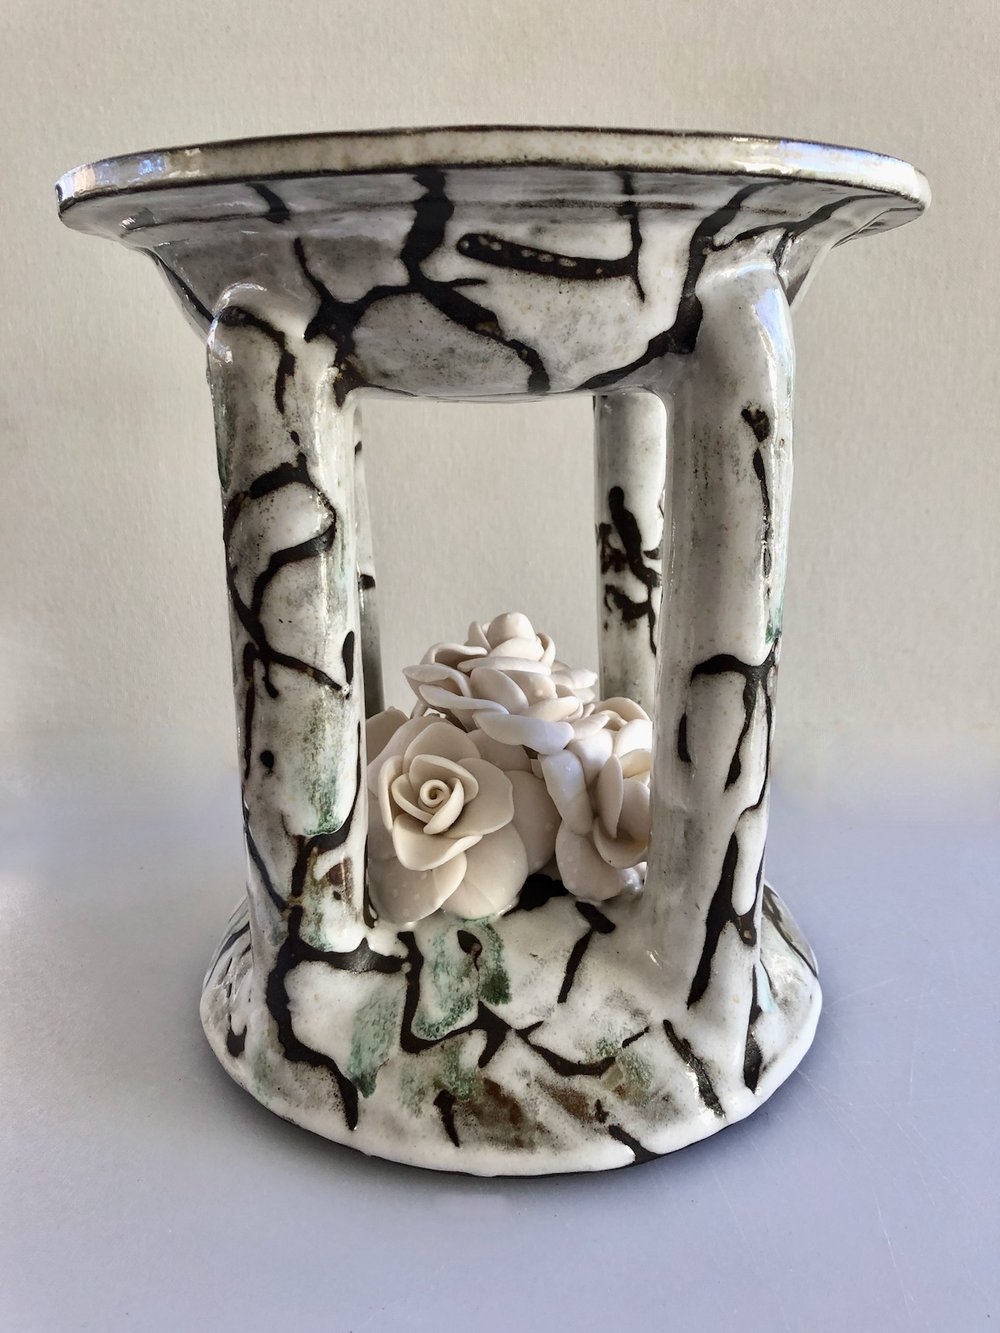    For the Glory of the Cake  , ceramic stoneware with midrange porcelain, 12” x 10” x 10” 